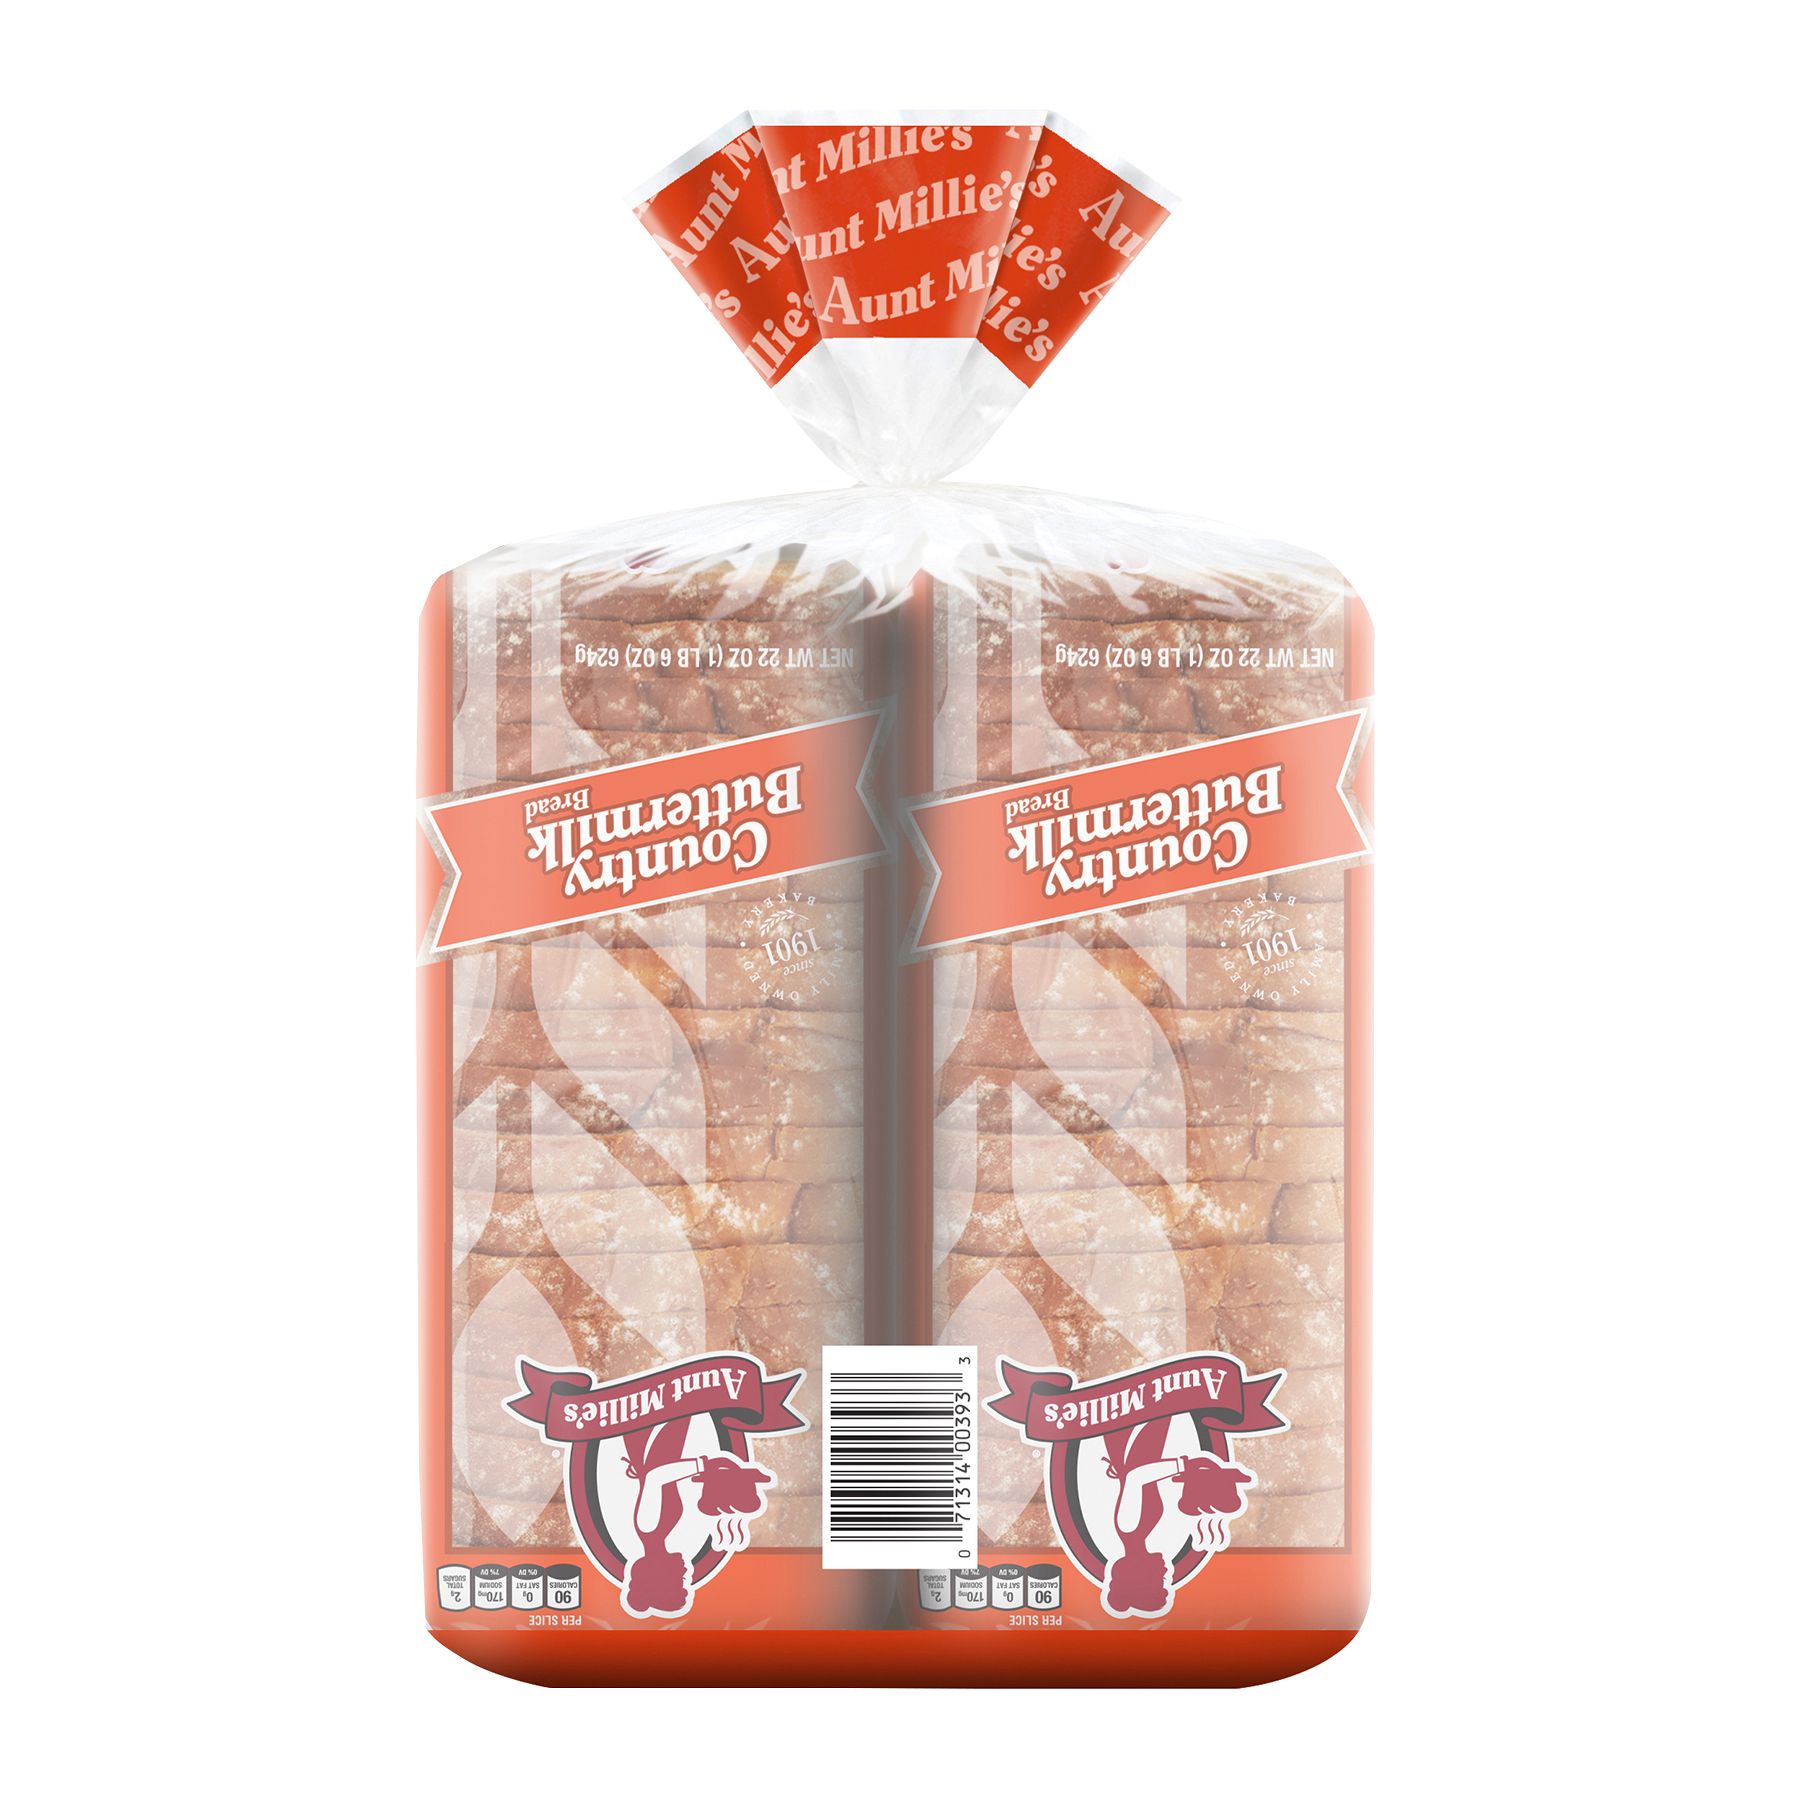 Aunt Millie's Country Buttermilk Bread Twin Pack, 44 oz.